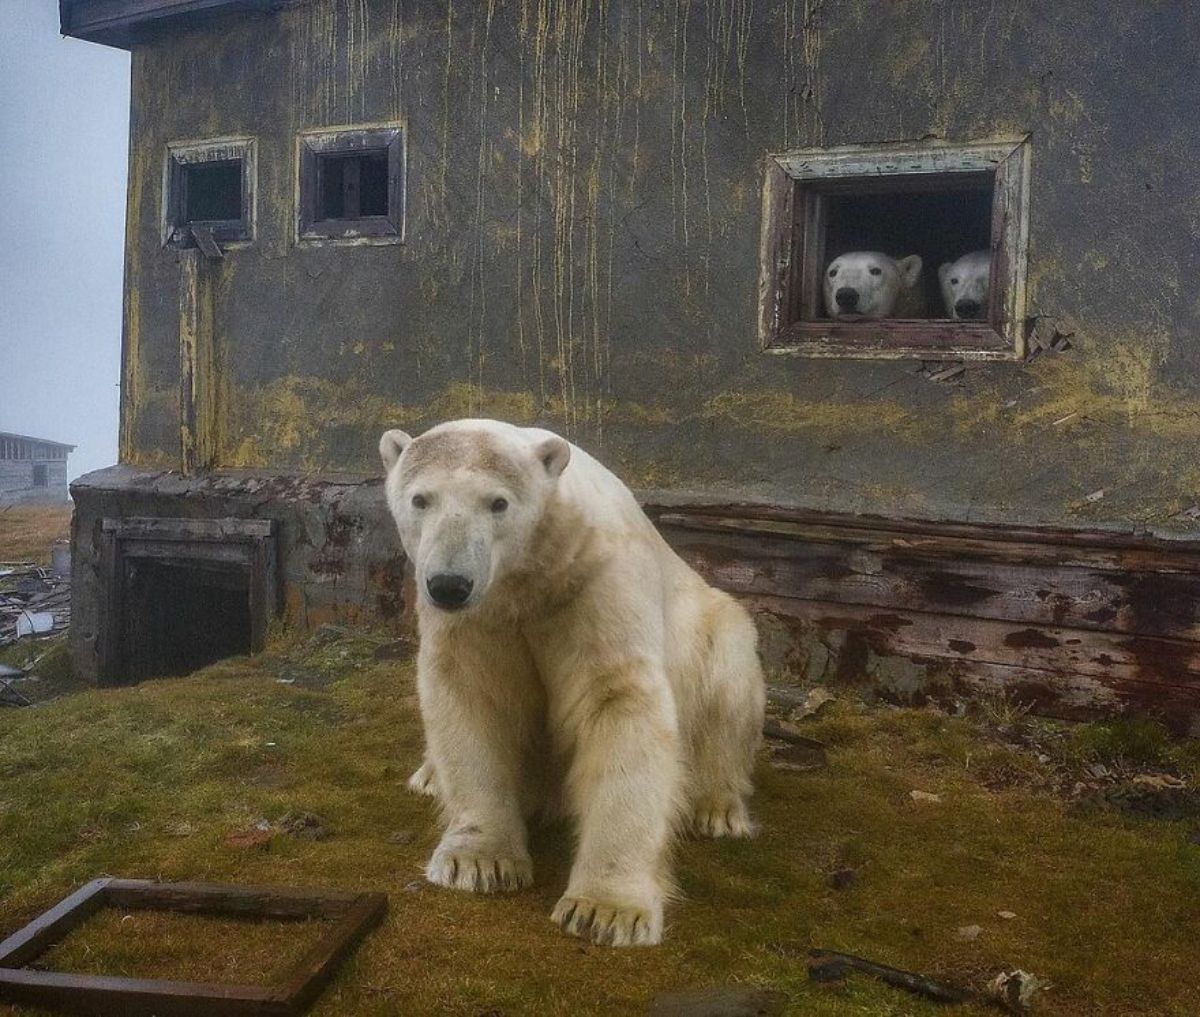 polar bear standing outside a house with 2 others looking out of a window